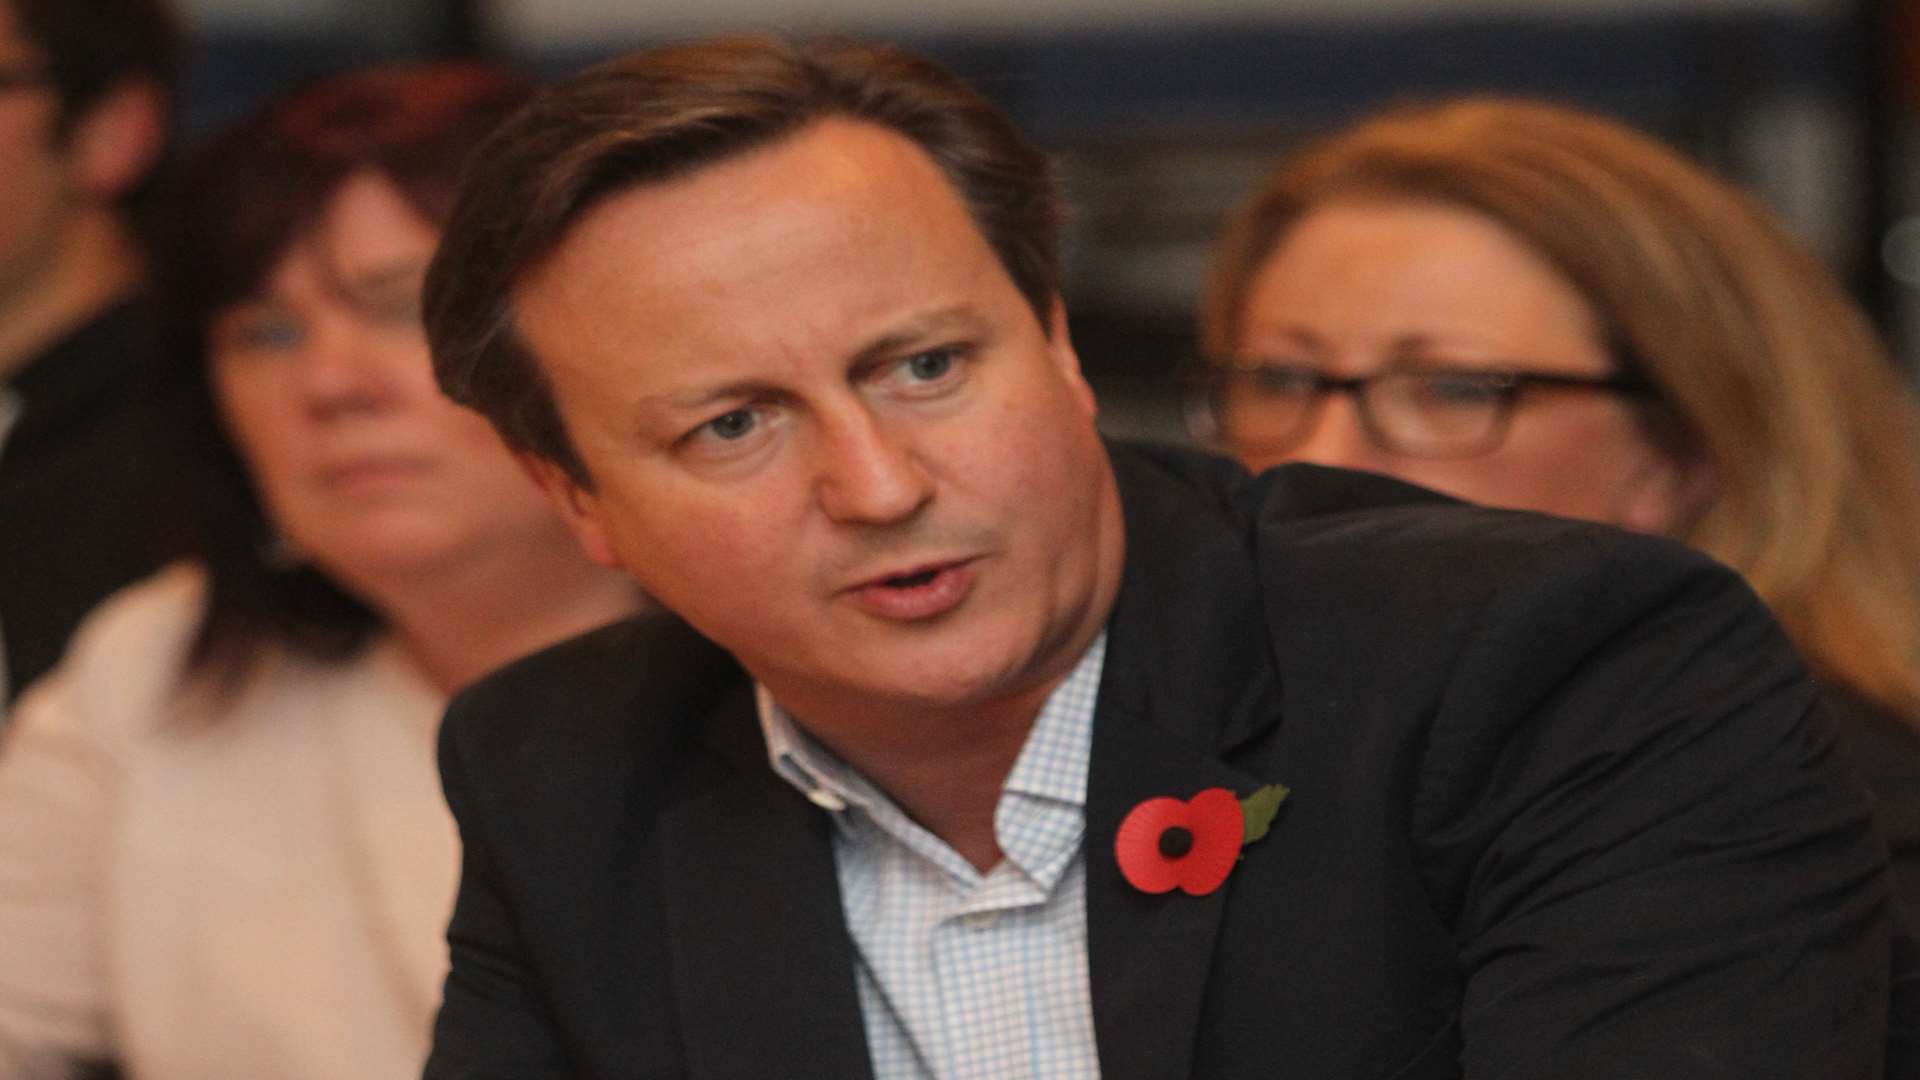 PM David Cameron has backed the campaign